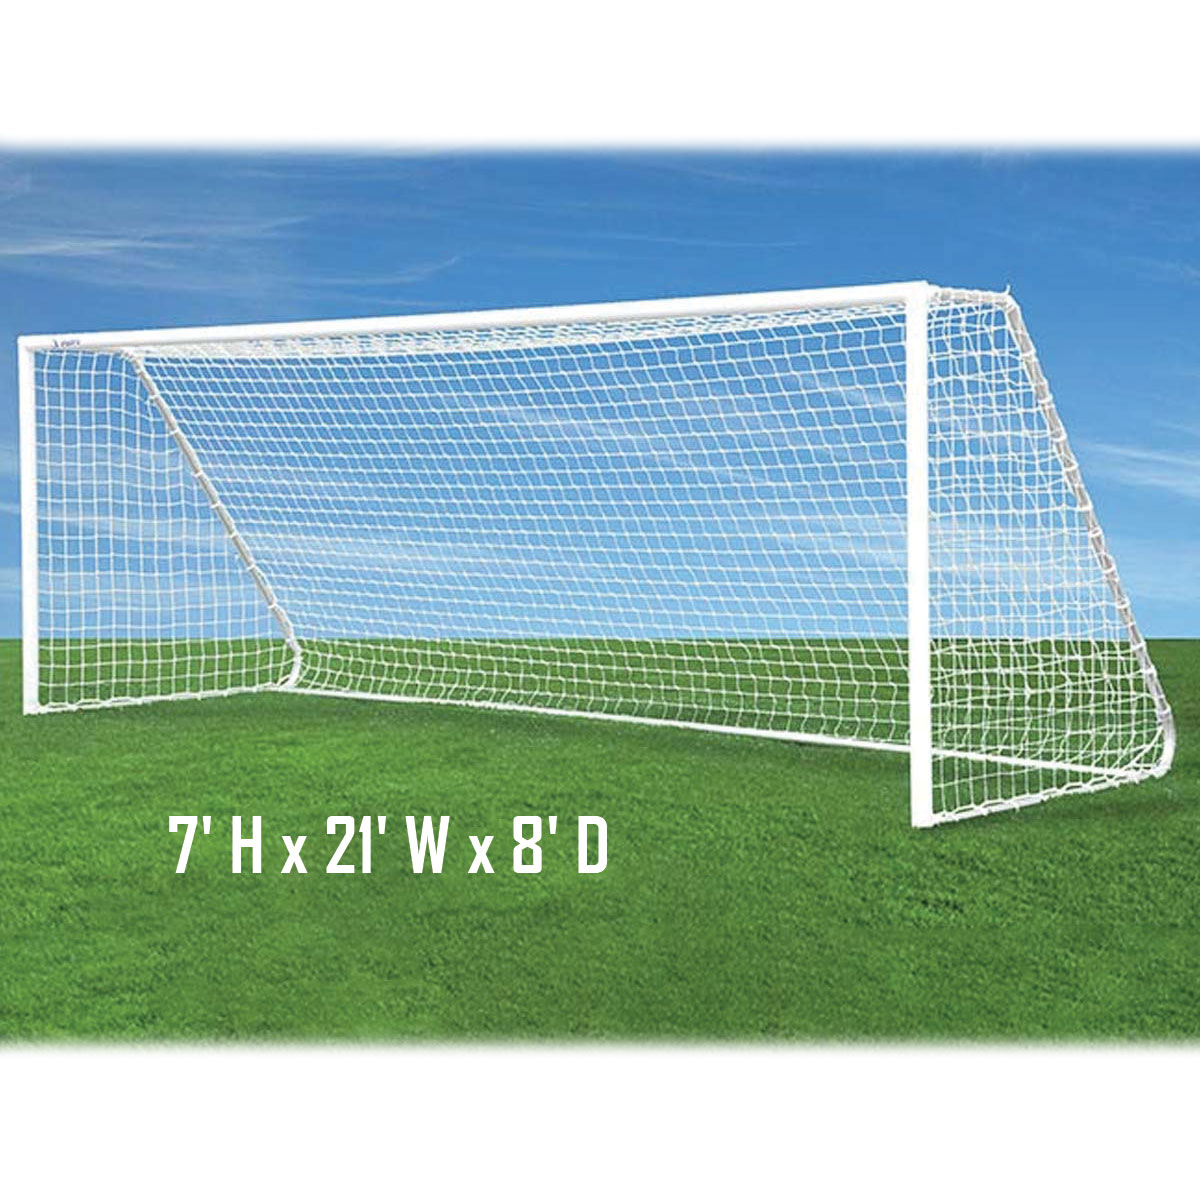 Pair of Soccer Nets for Jaypro Ultra-Light Classic Goals - 21' wide